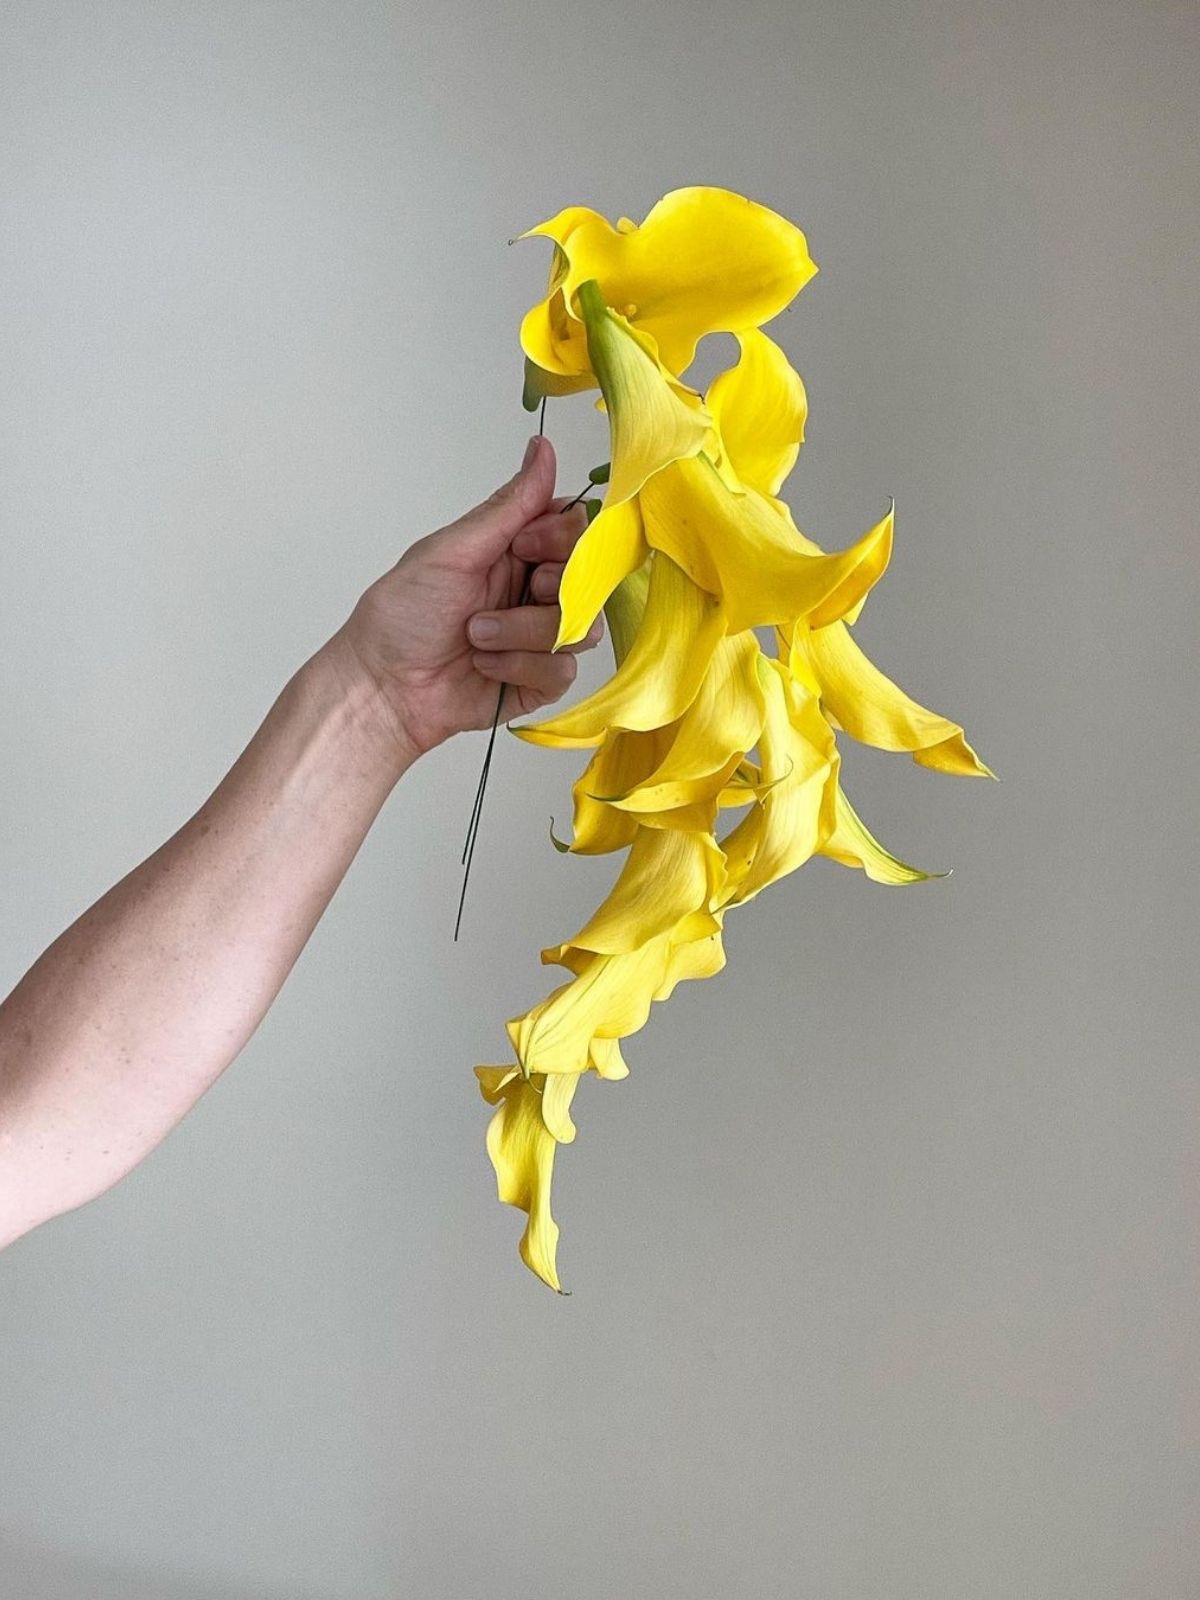 Susan McLeary Playful with yellow Callas - on Thursd